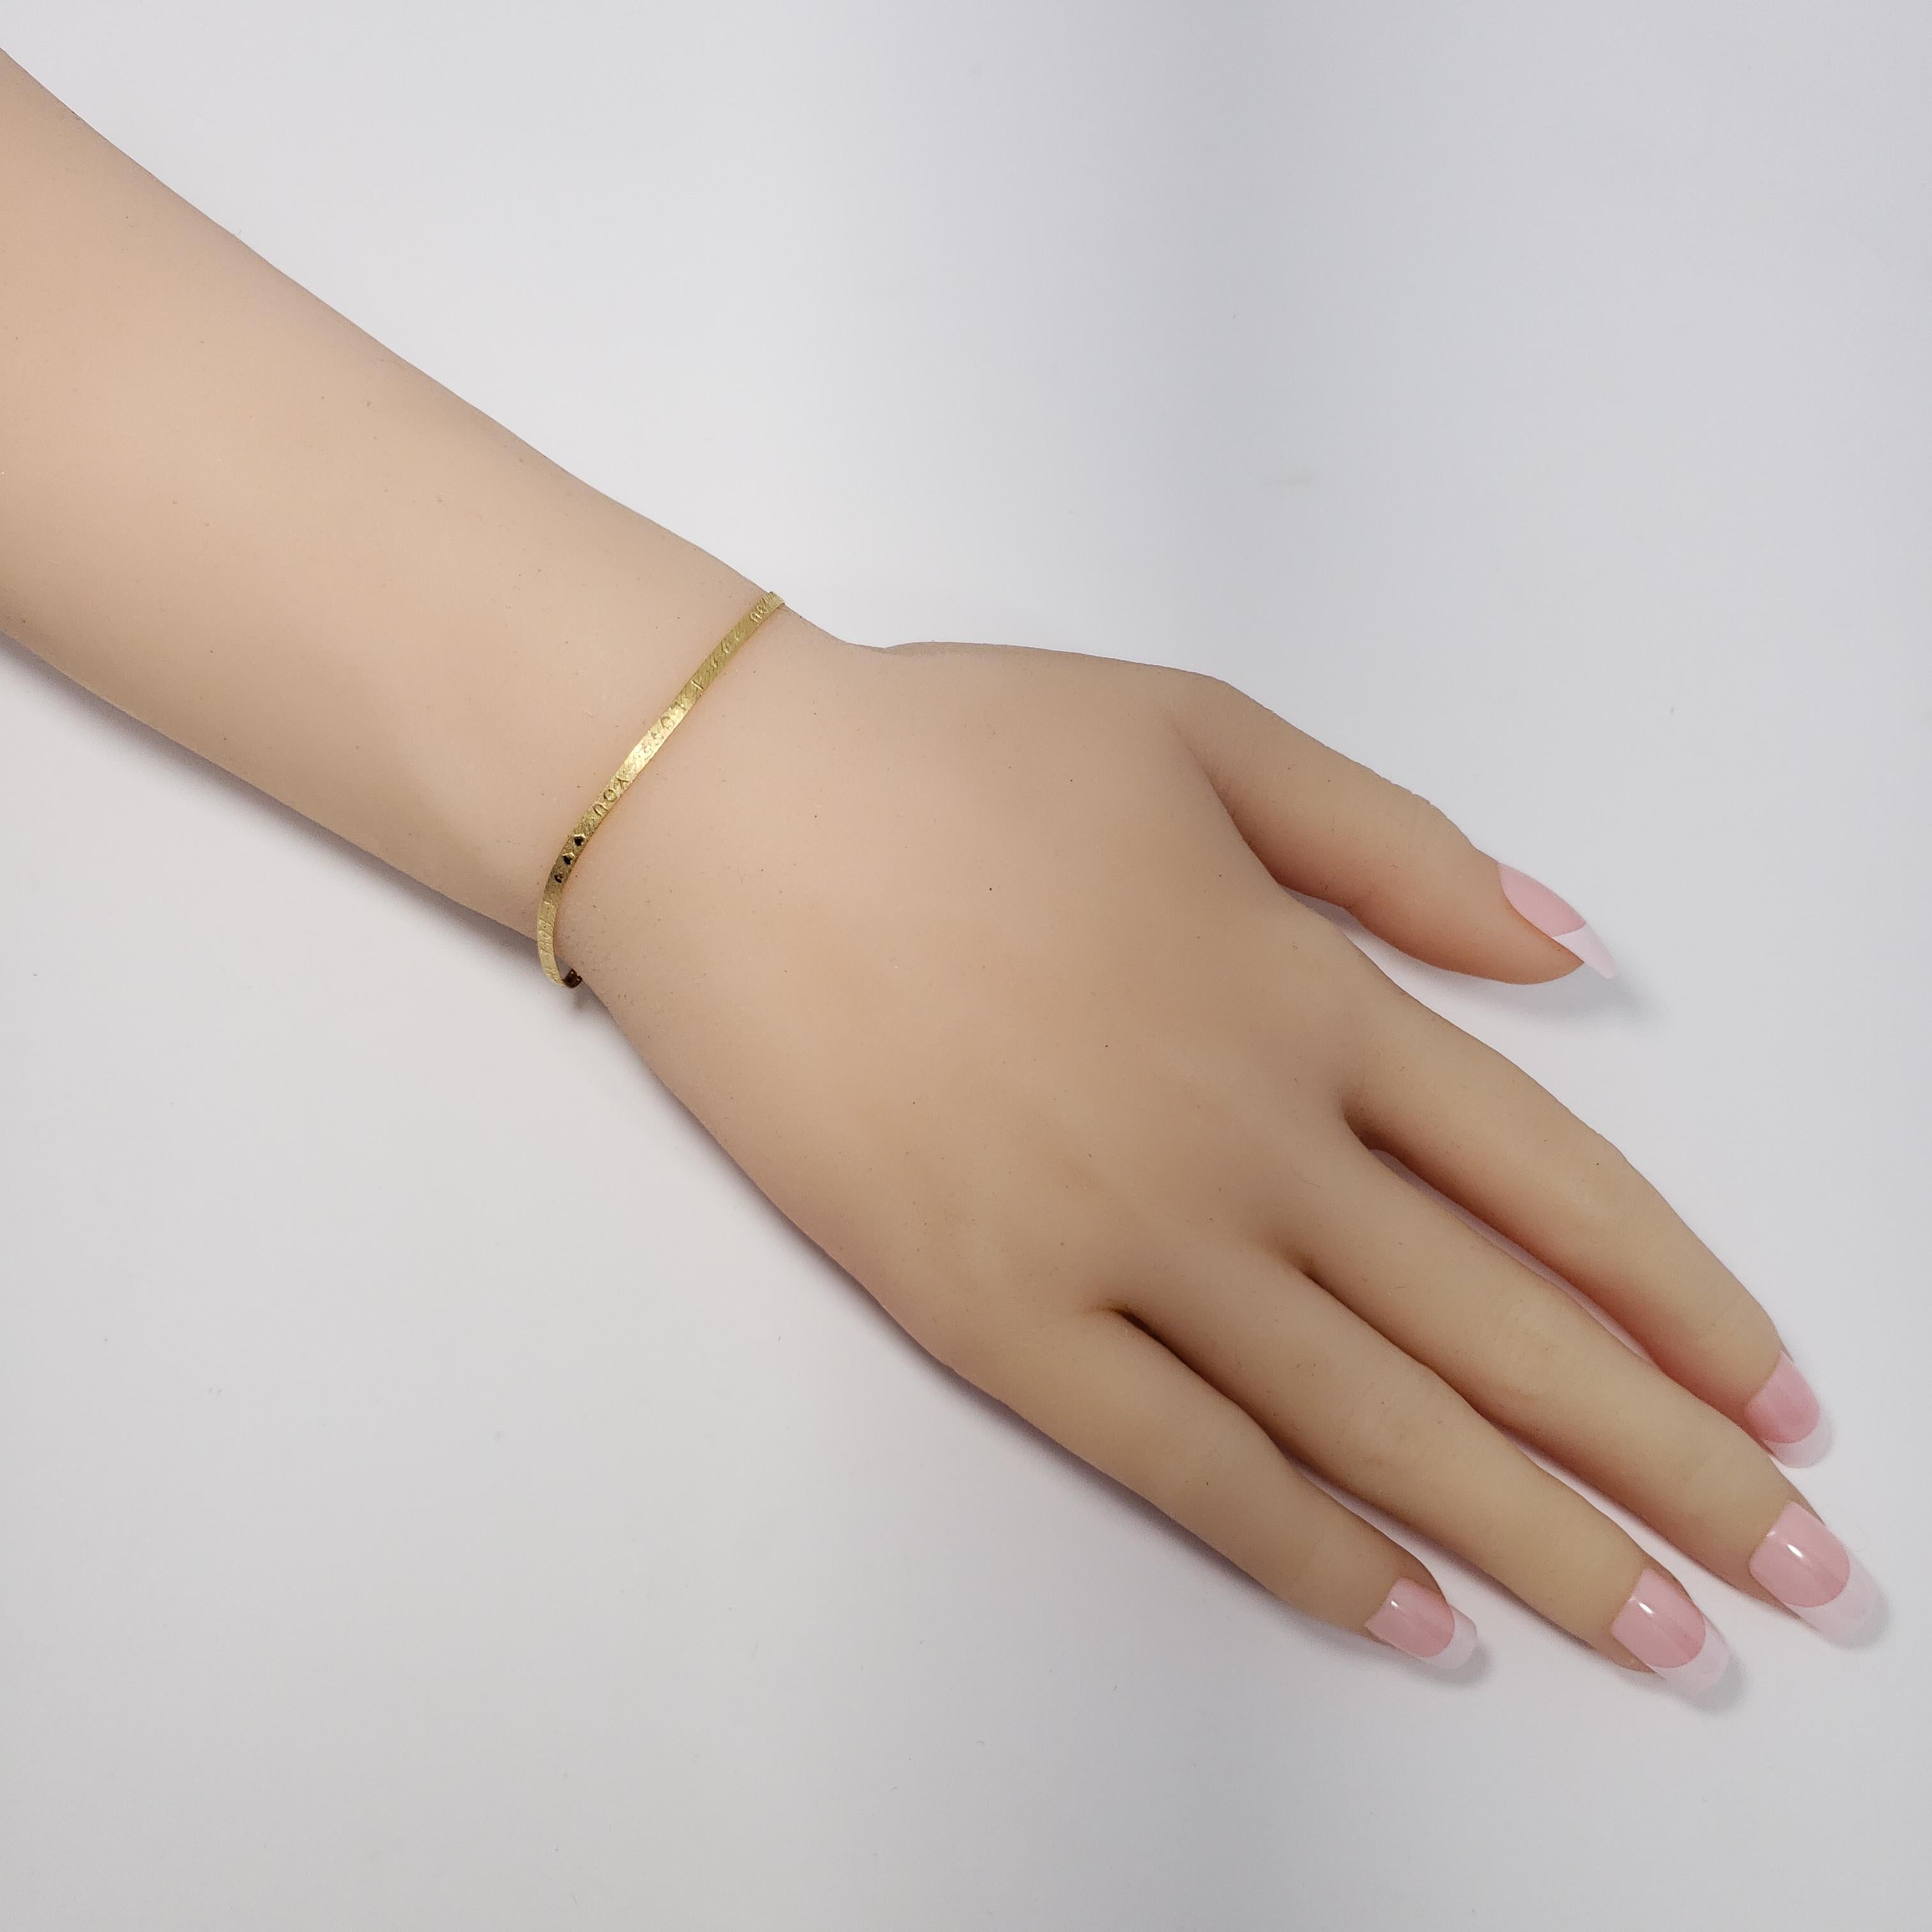 A minimalist 14K yellow gold chain vintage bracelet with 